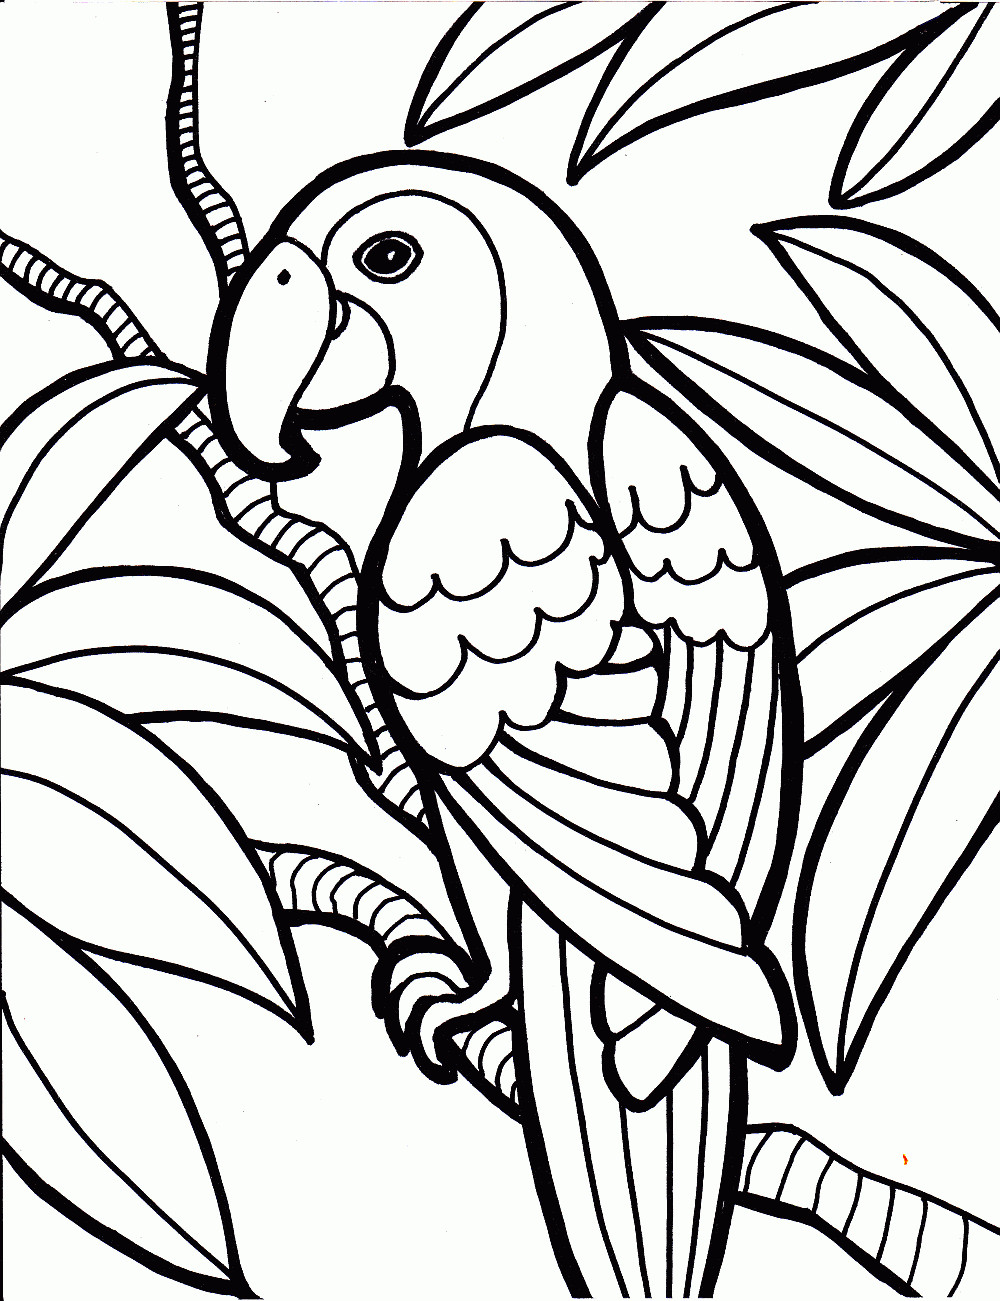 Coloring Pages For Girls Online
 Coloring Now Blog Archive Coloring Pages line